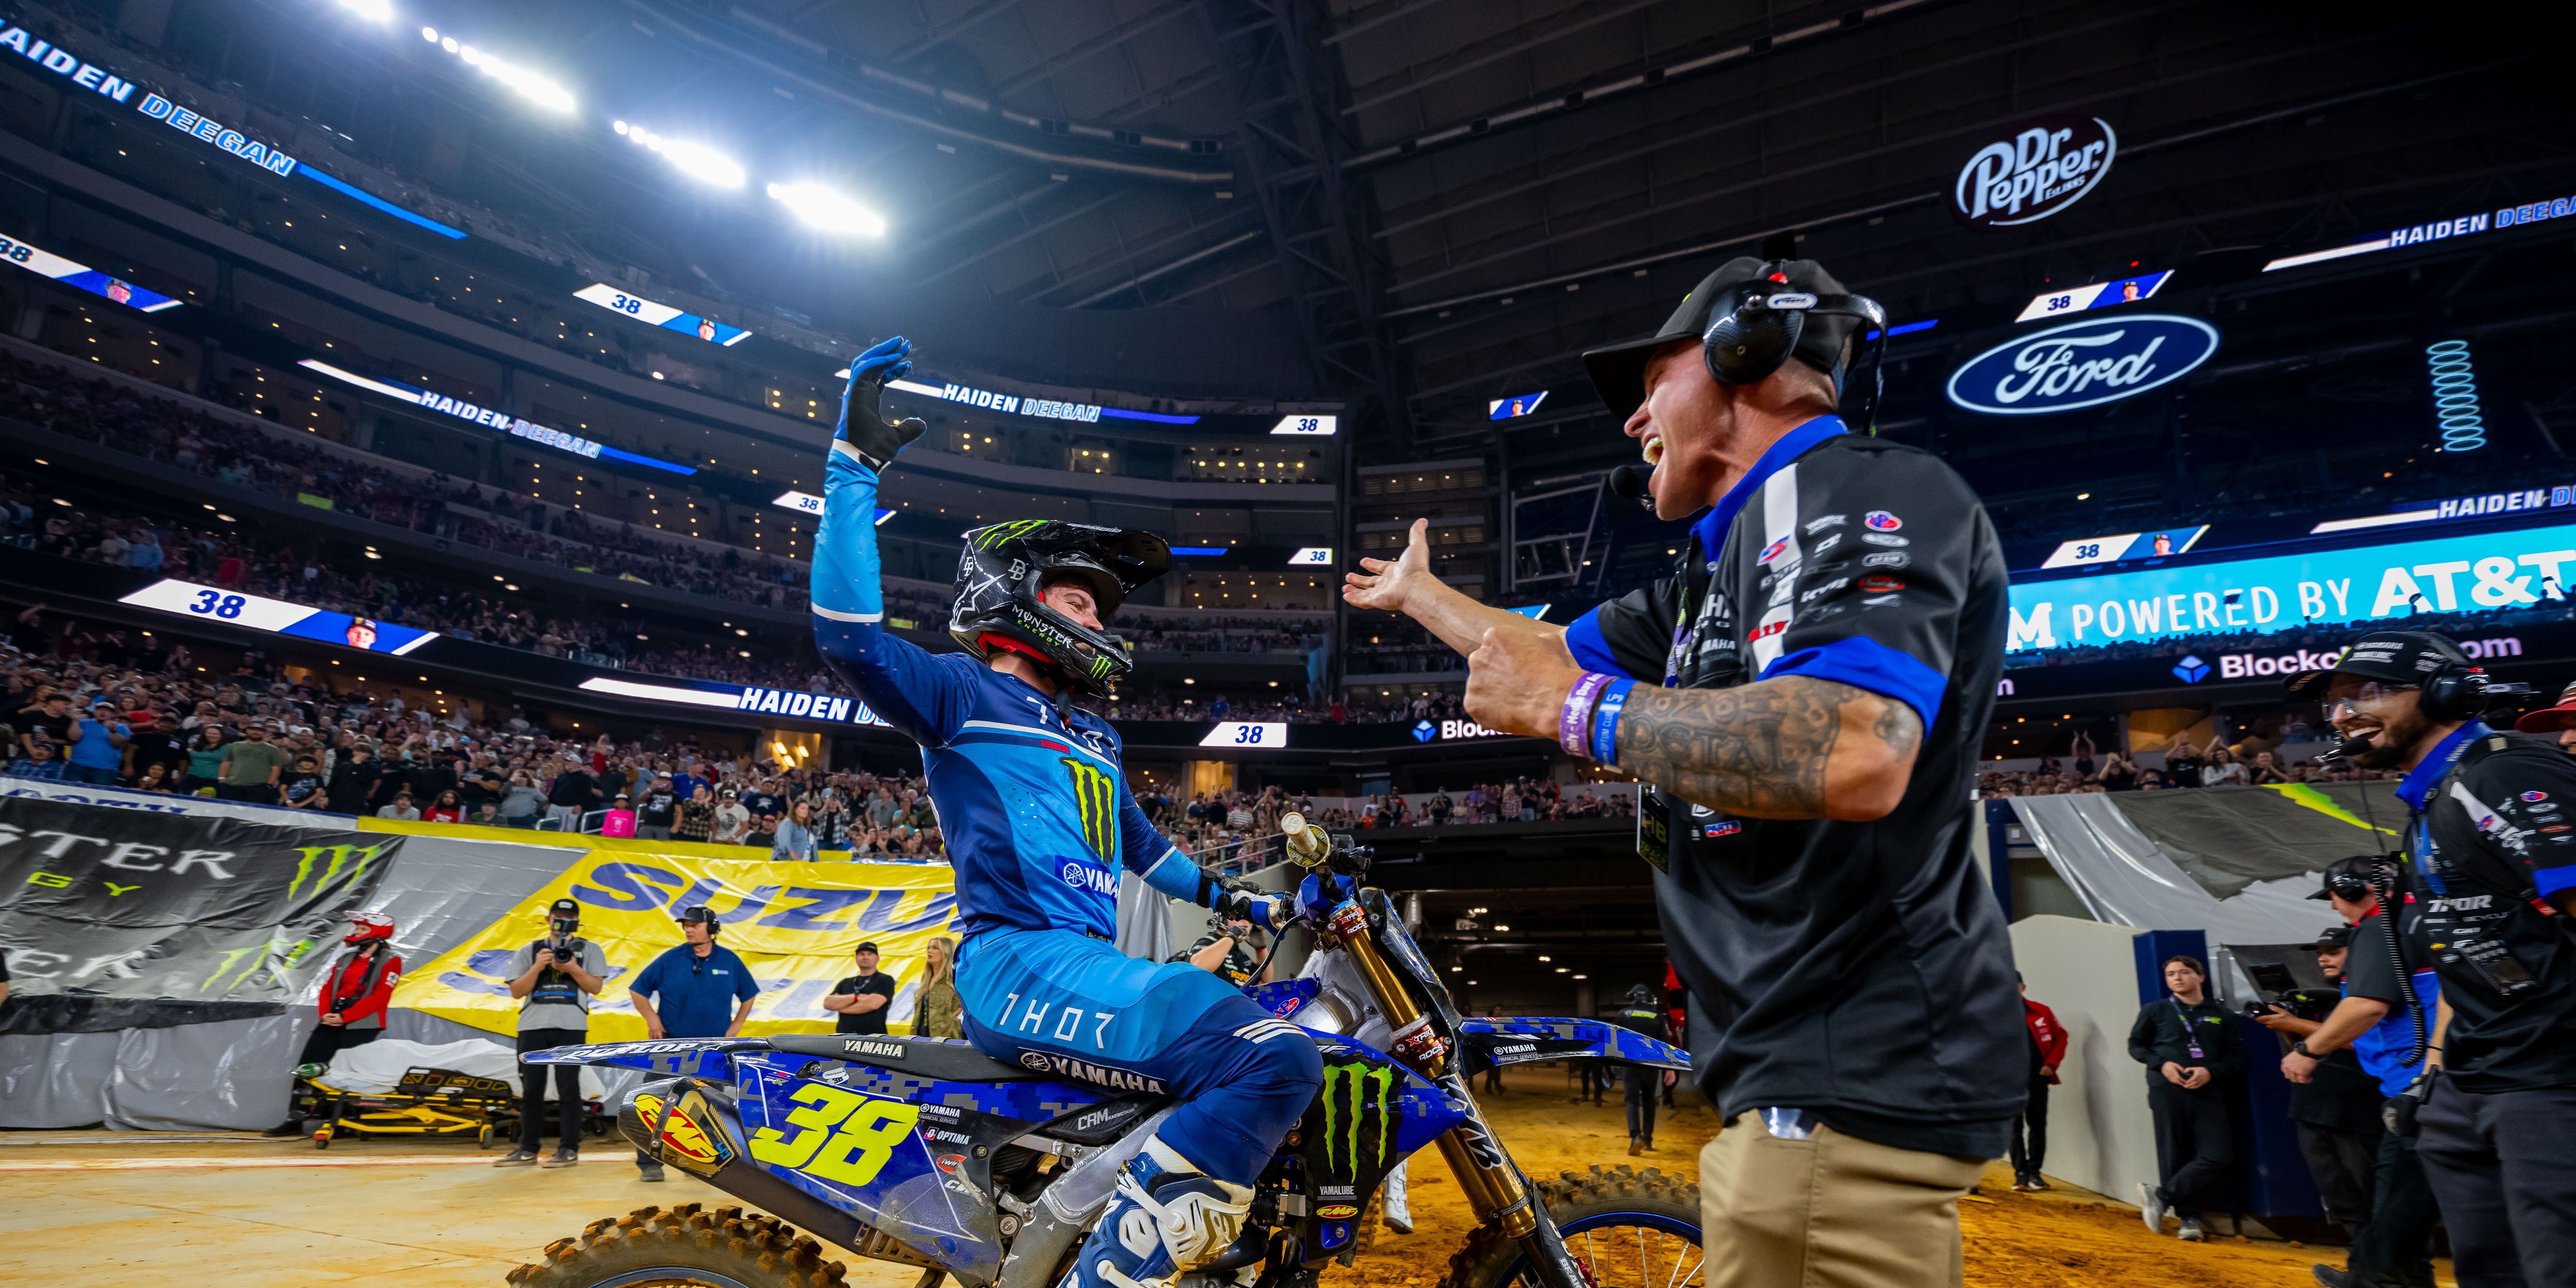 Haiden Deegan Wins First Supercross Race and 'Ghost Rides' His Bike